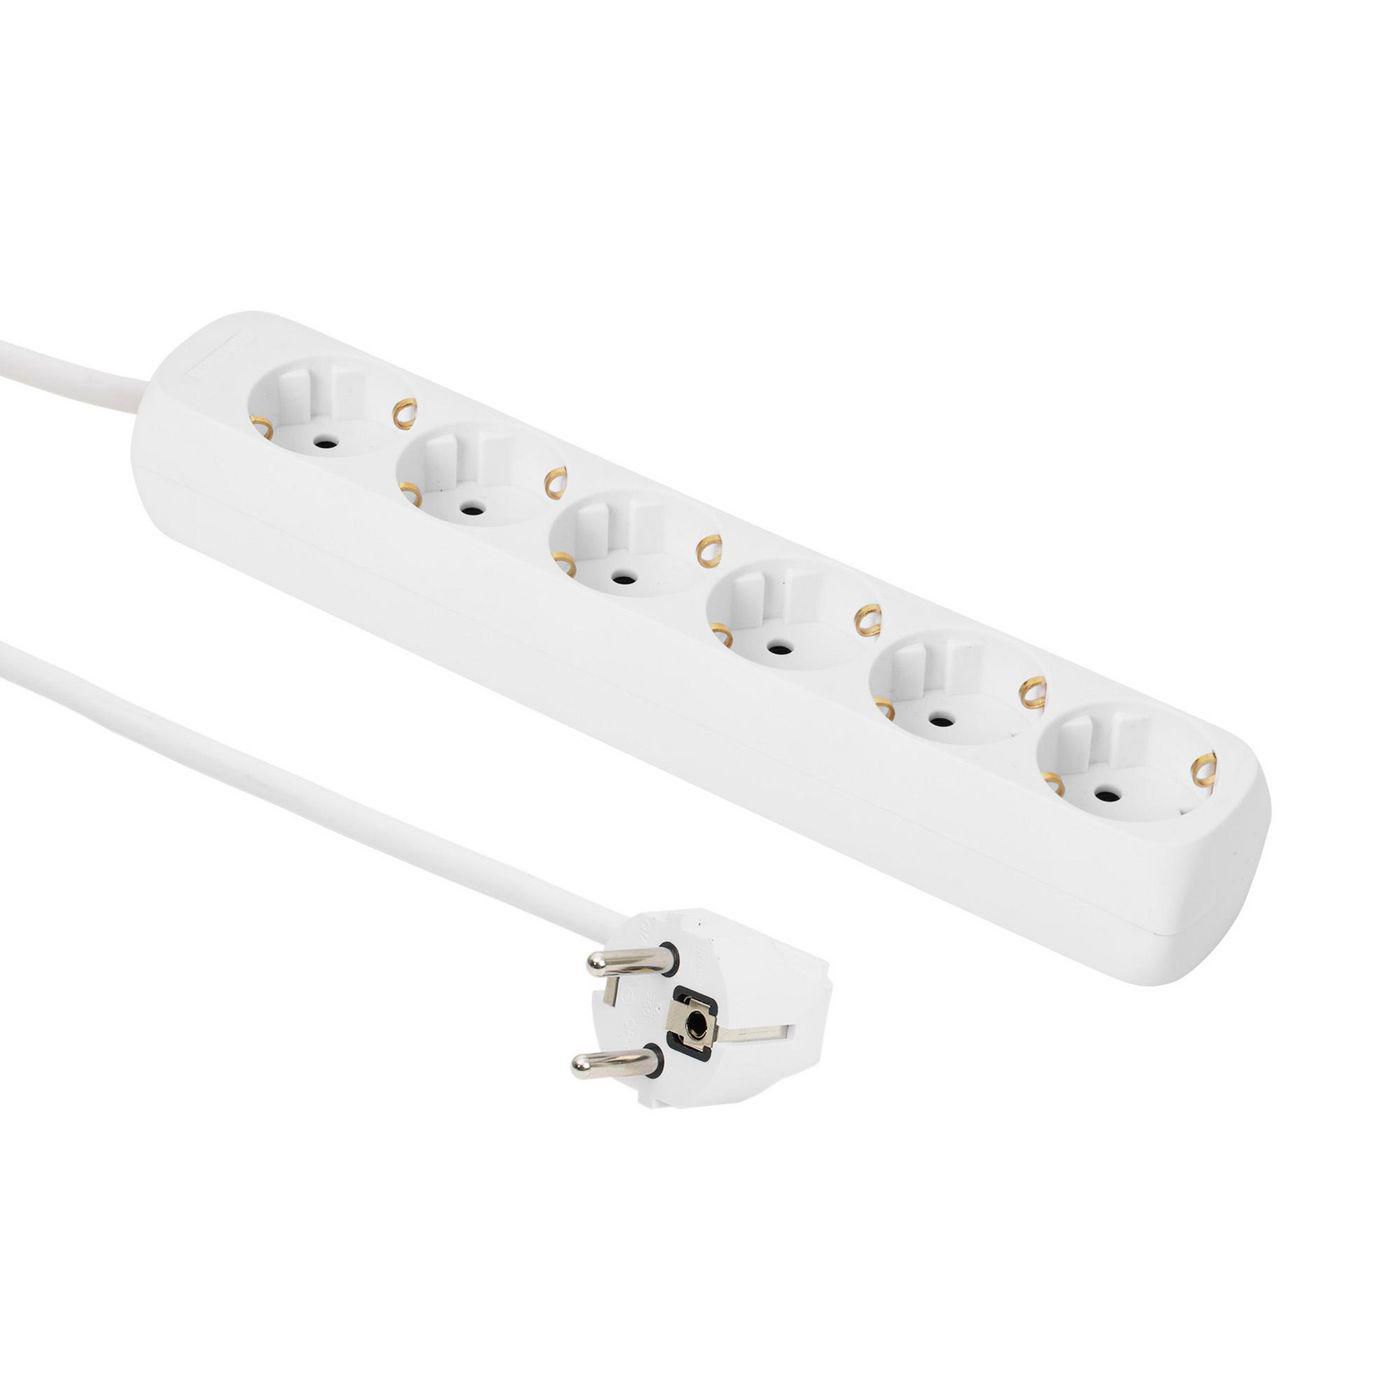 Schuko Power Socket - 6-way - 1.5m Without On/off Switch, White